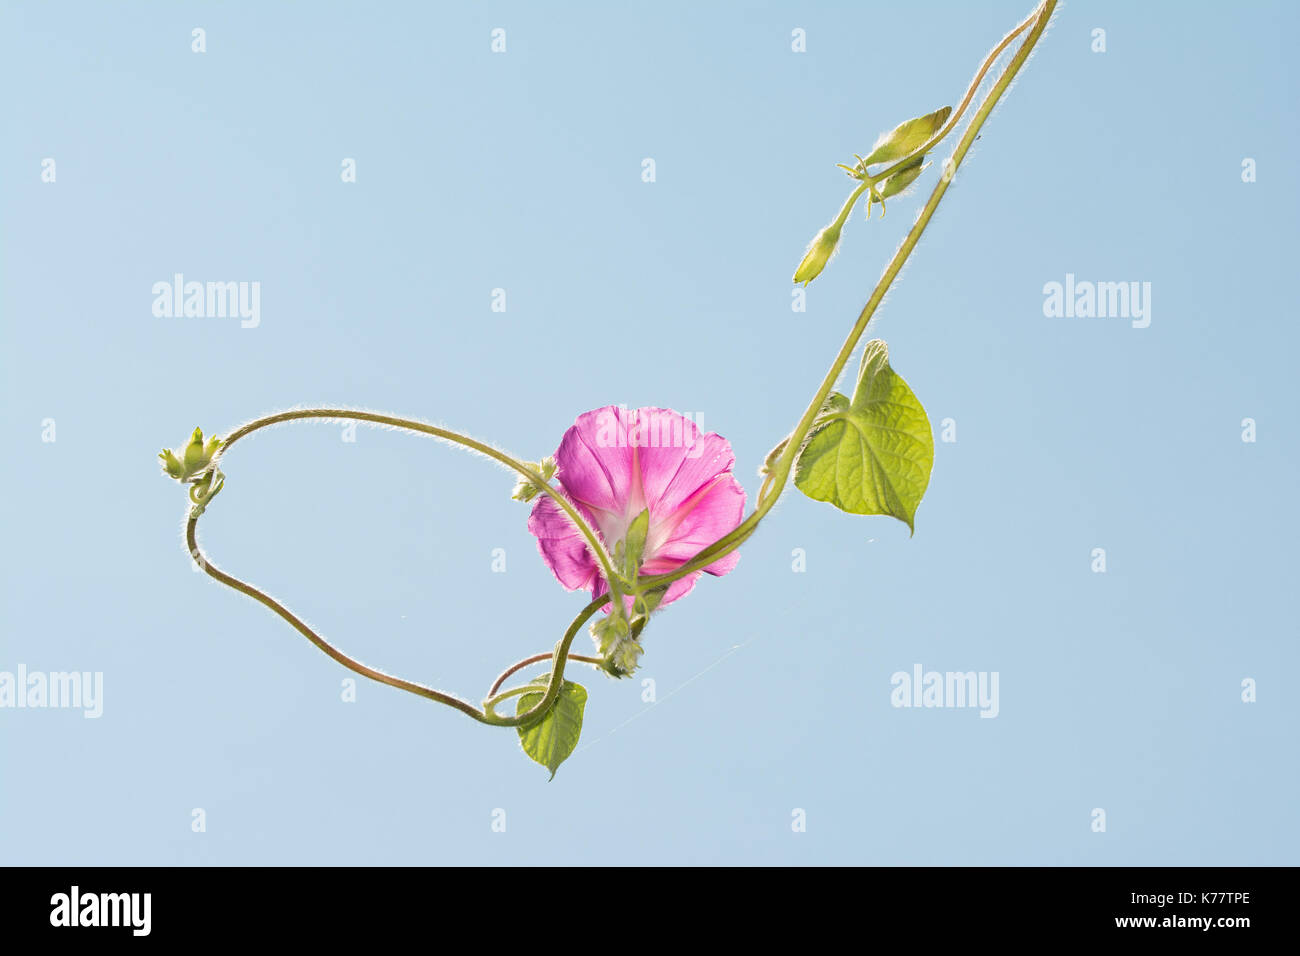 Pink Morning Glory flower hanging against pale blue sky, with the vine circling back to itself Stock Photo